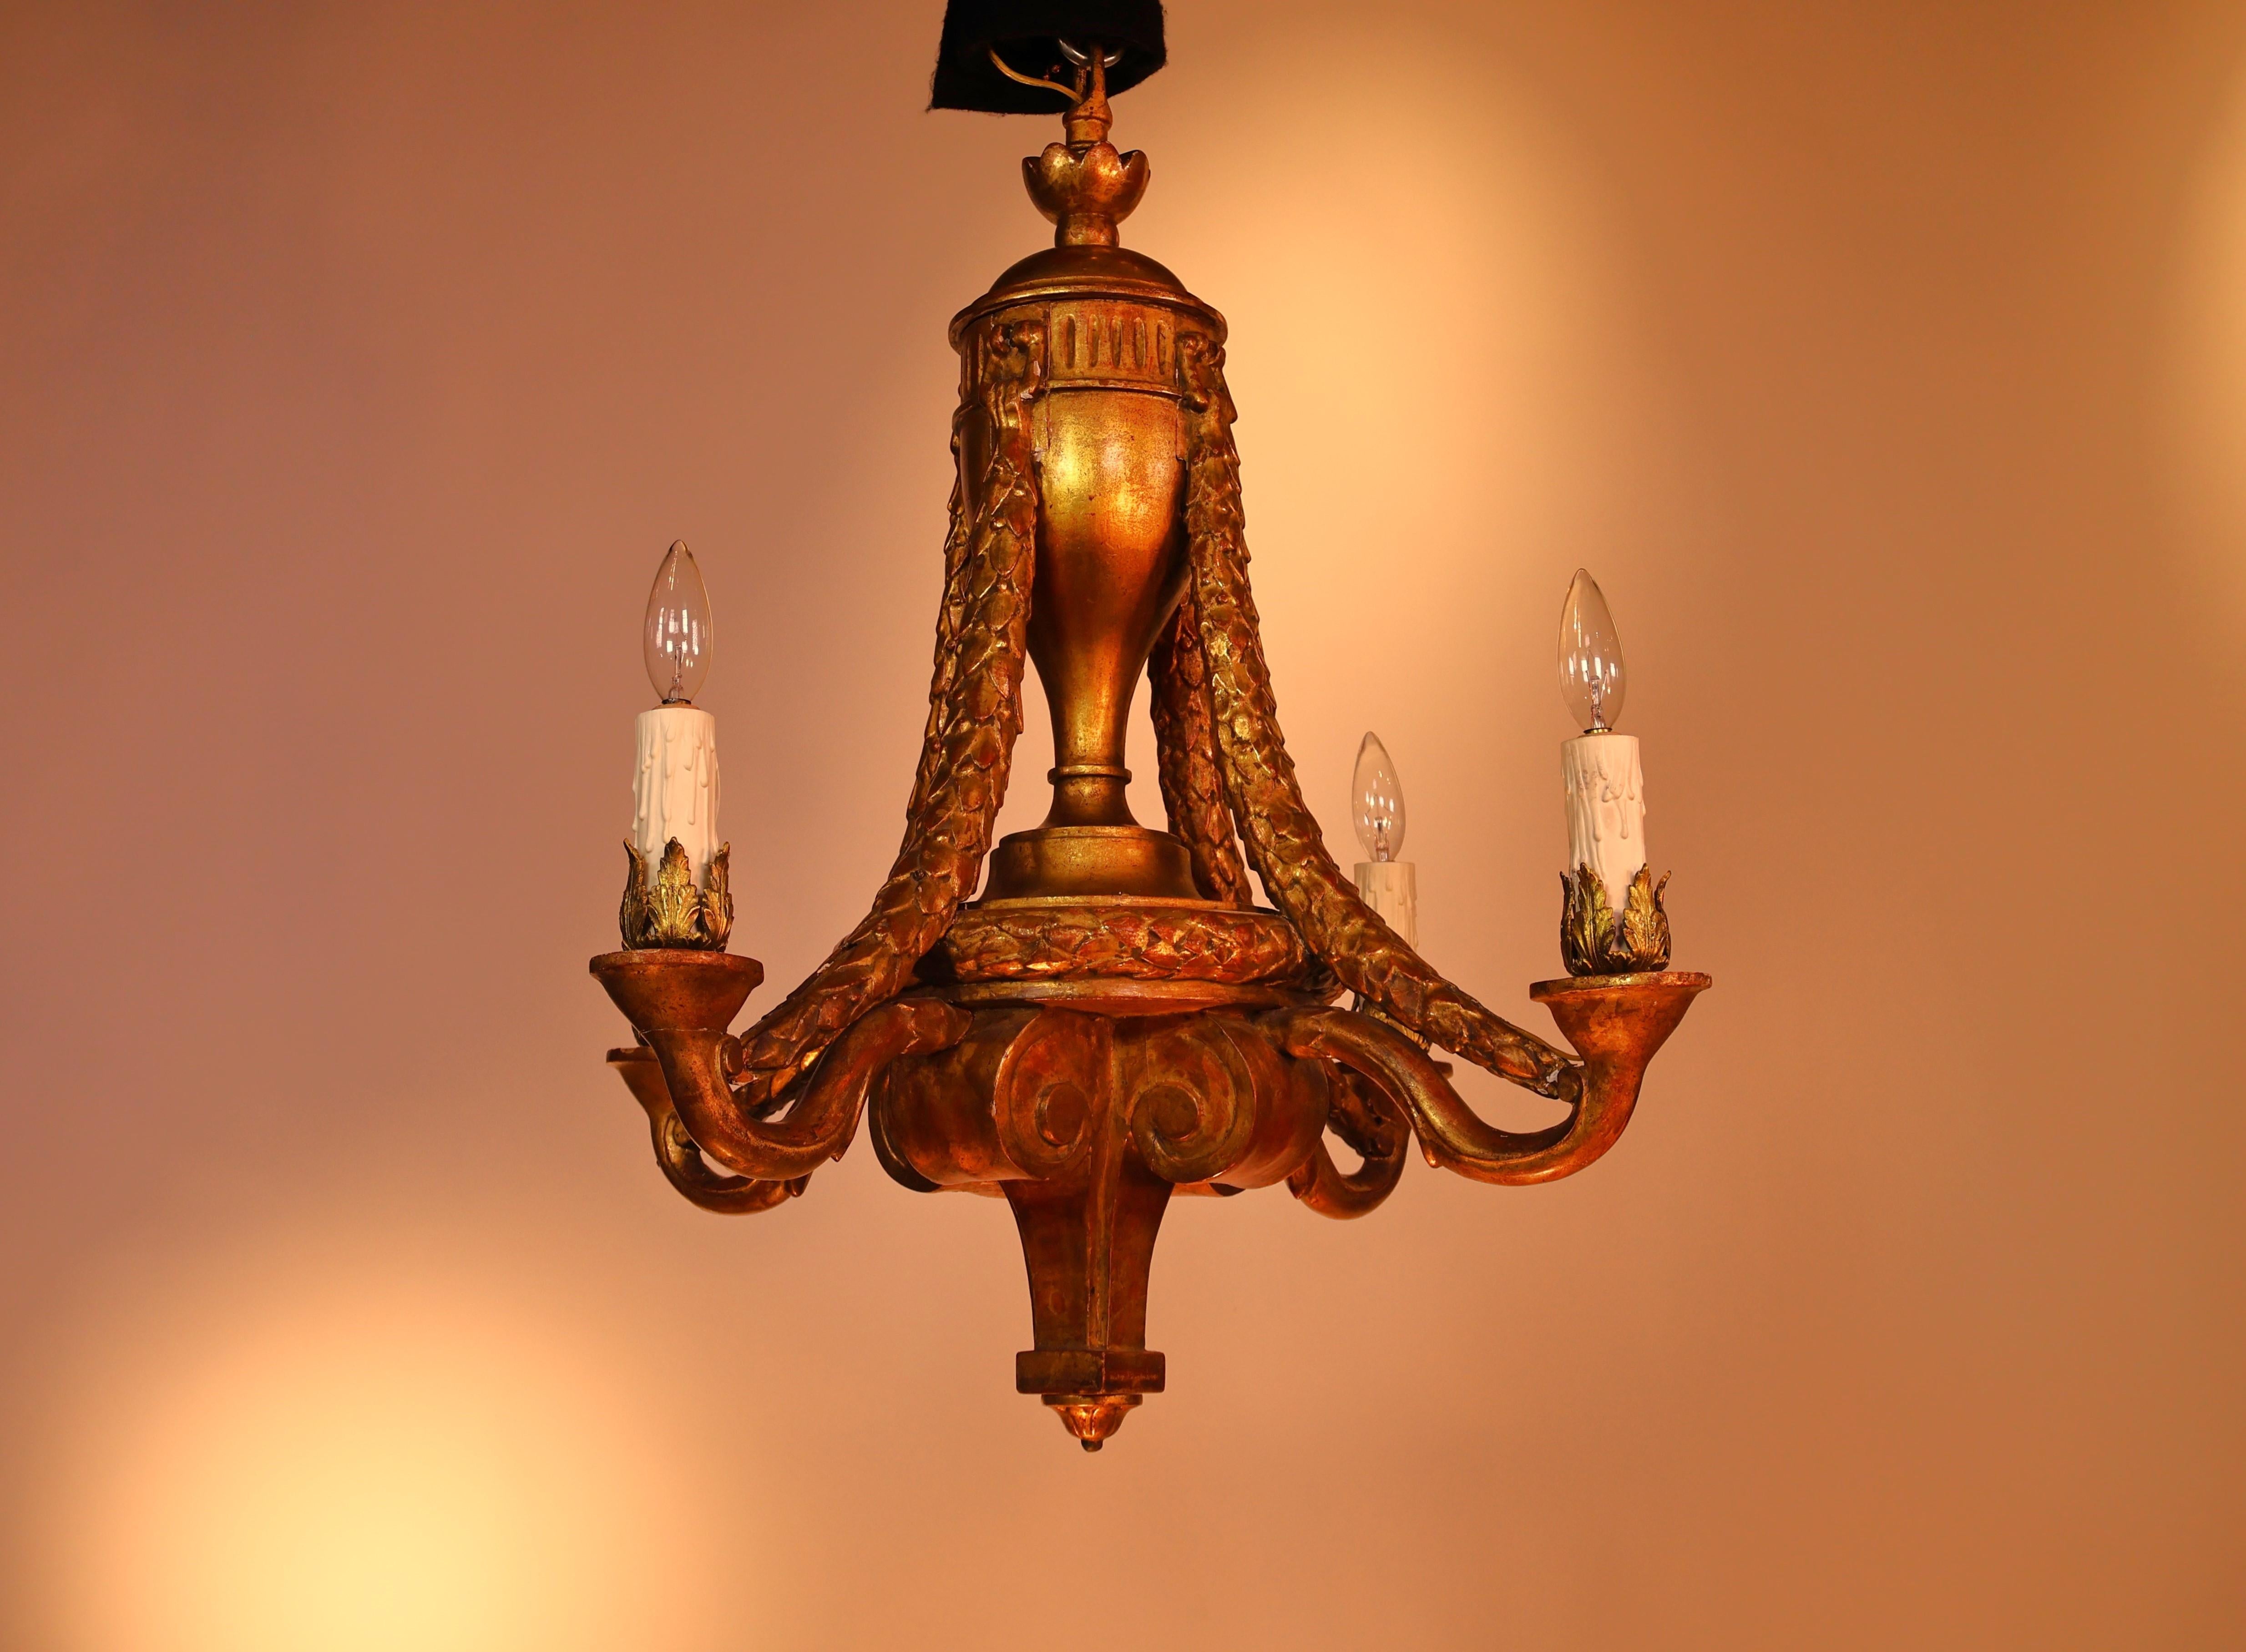 A Very Fine late 19th Century Giltwood Chandelier in the Louis XVI style. Original gilding. 4 lights. France, circa 1890. 
Dimensions: Height 28 1/2